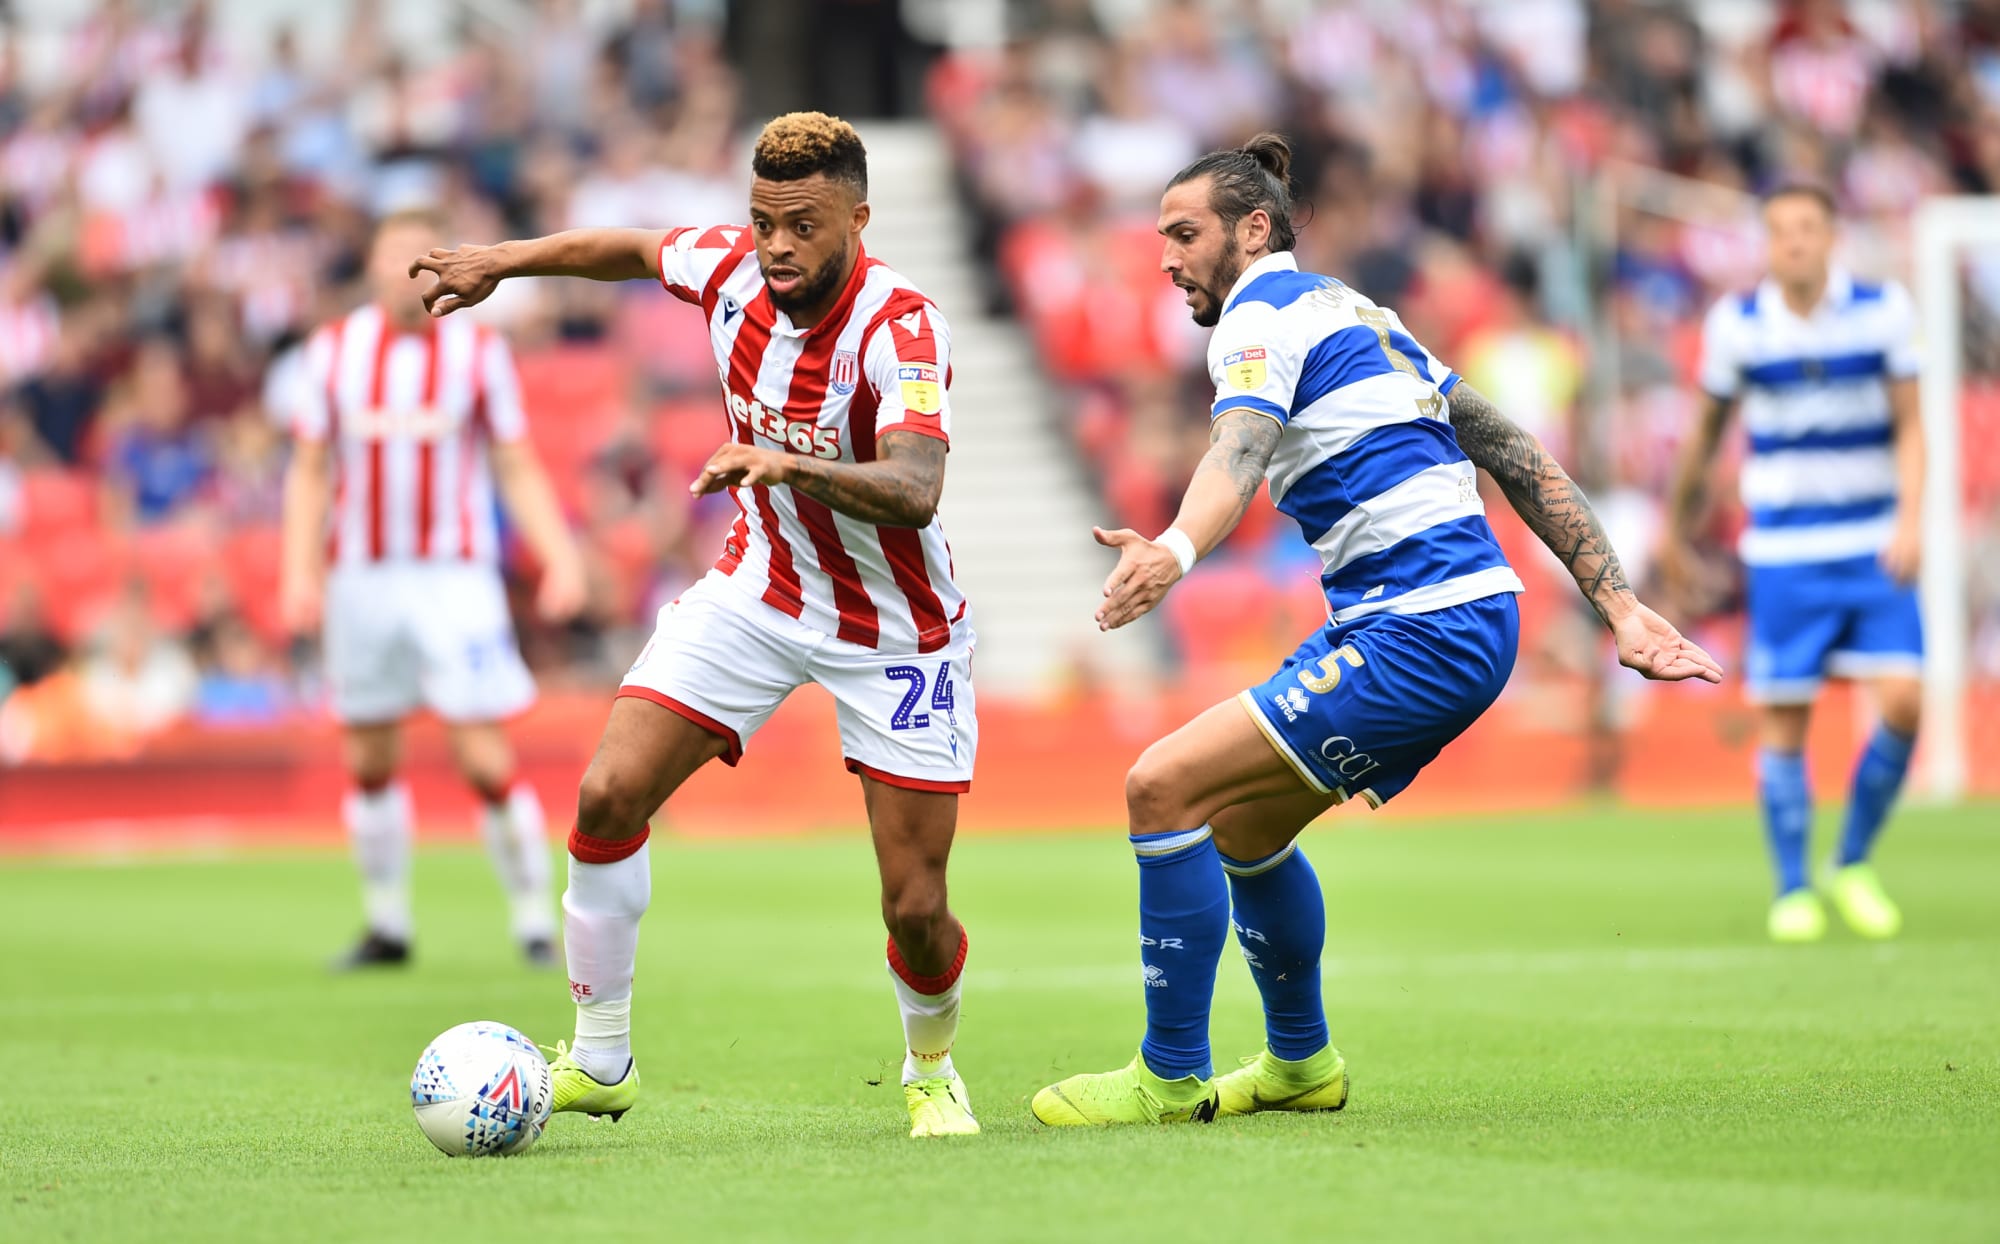 Stoke City vs. QPR Preview: Lineups and Predictions